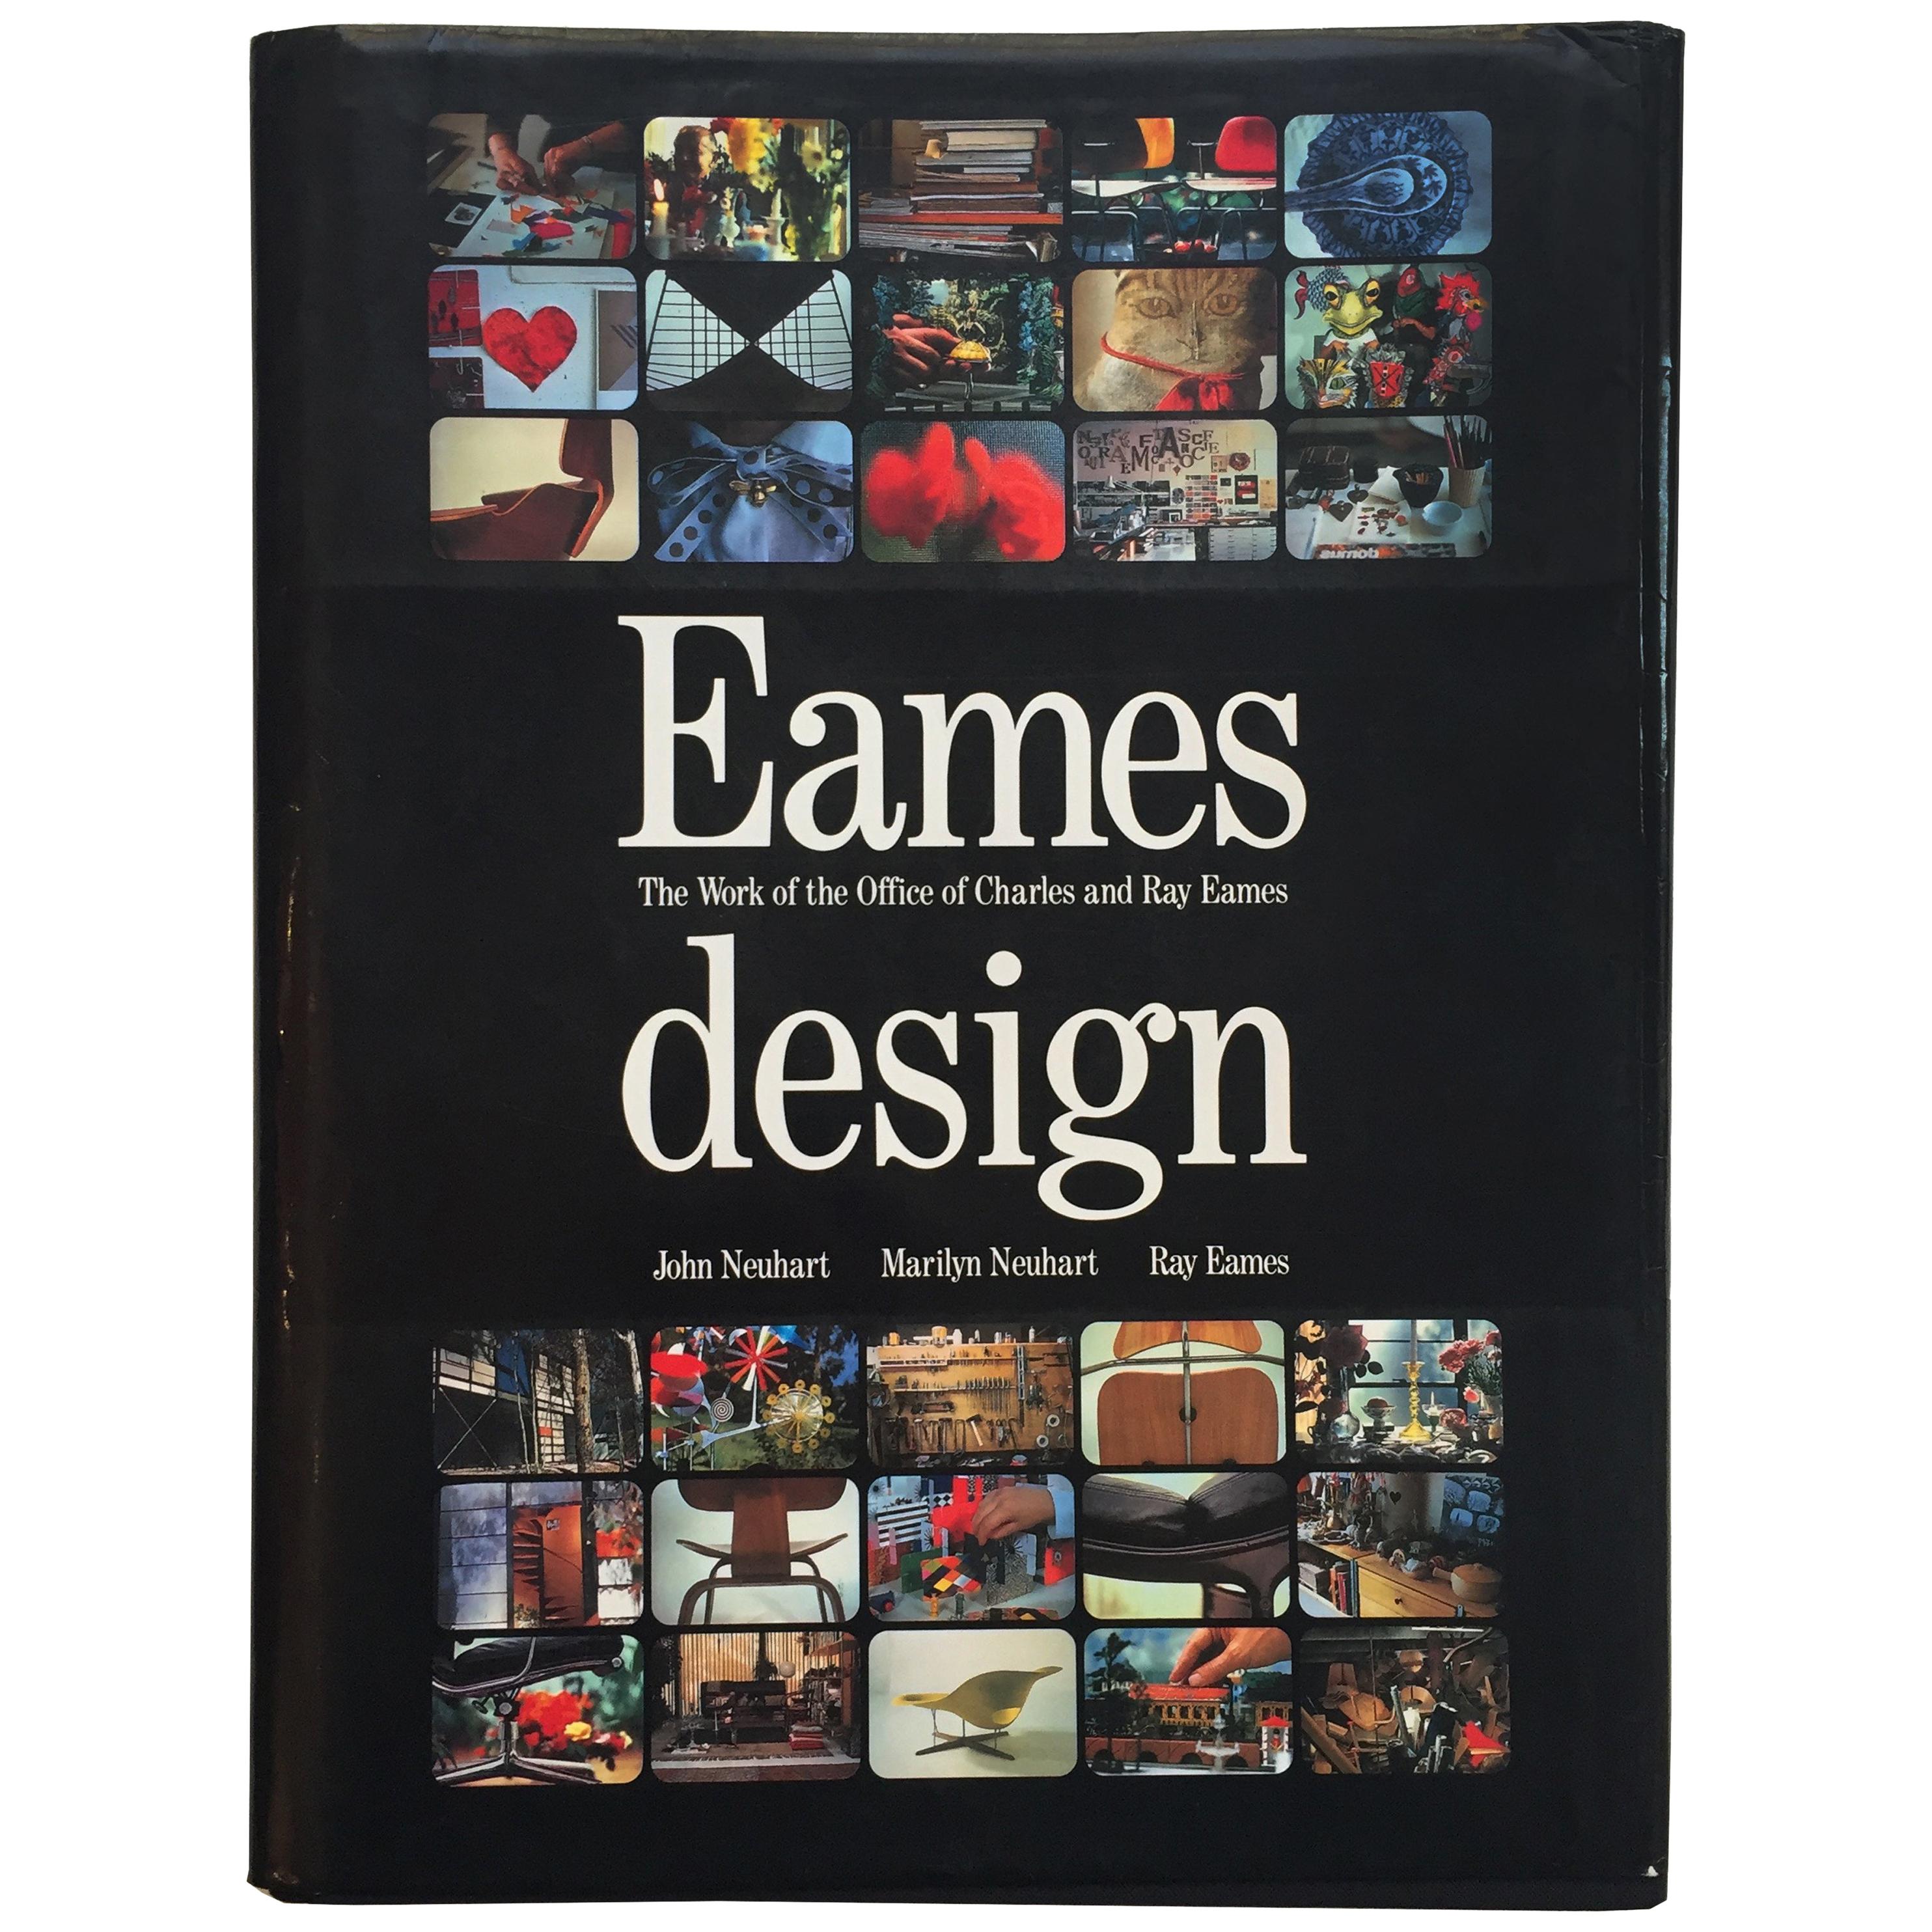 Eames Design: The Work of the Office of Charles and Ray Eames - Neuhart - 1994 For Sale